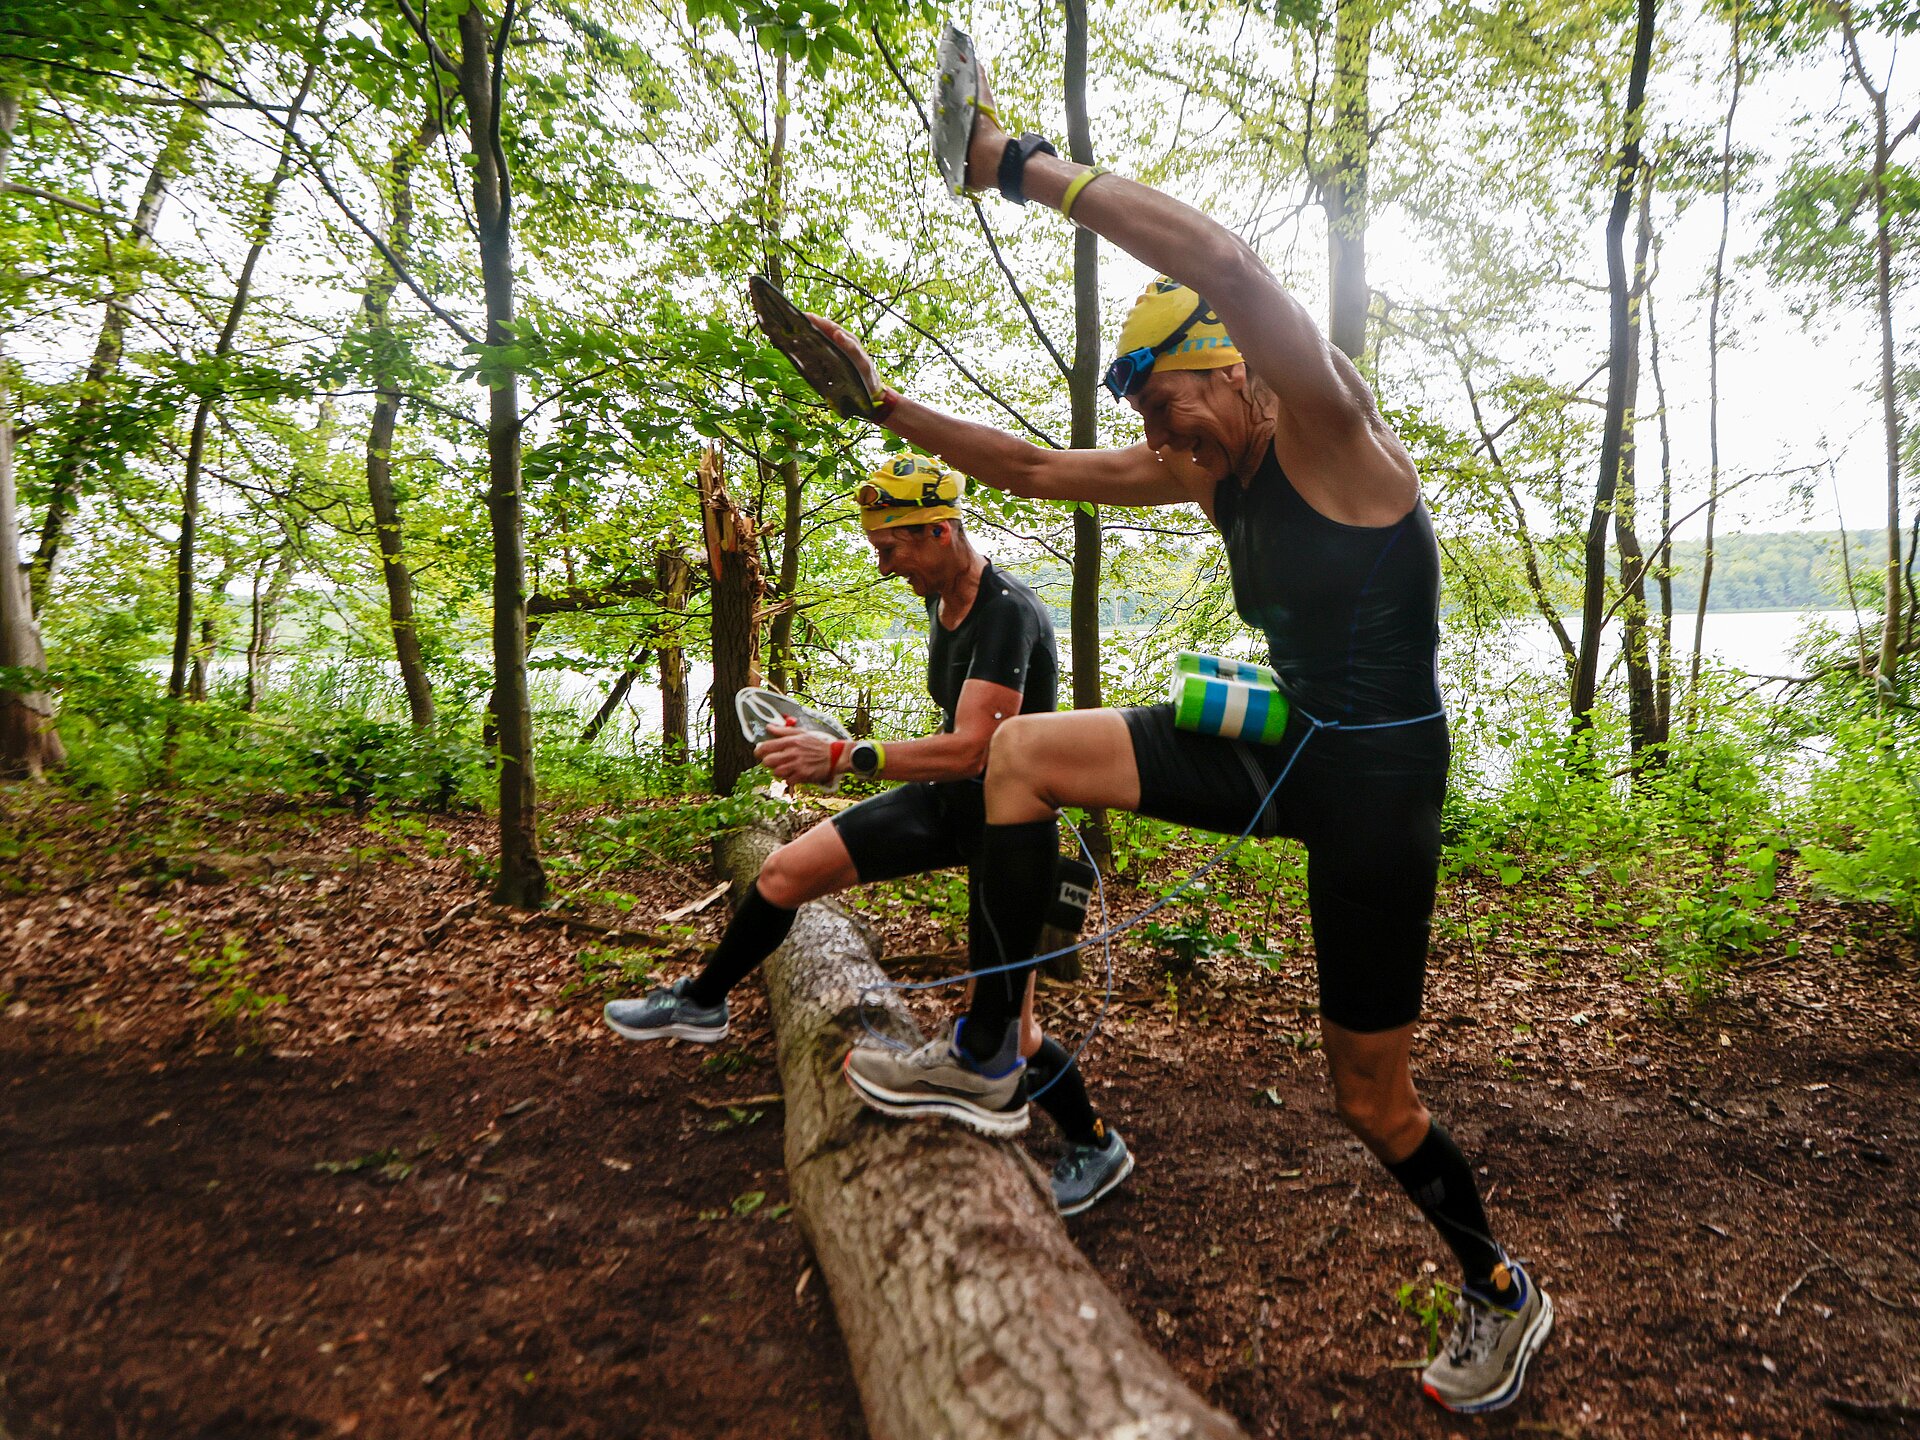 SwimRun: Female runners jump over a tree trunk in the forest © SCC EVENTS / Jean-Marc Wiesner